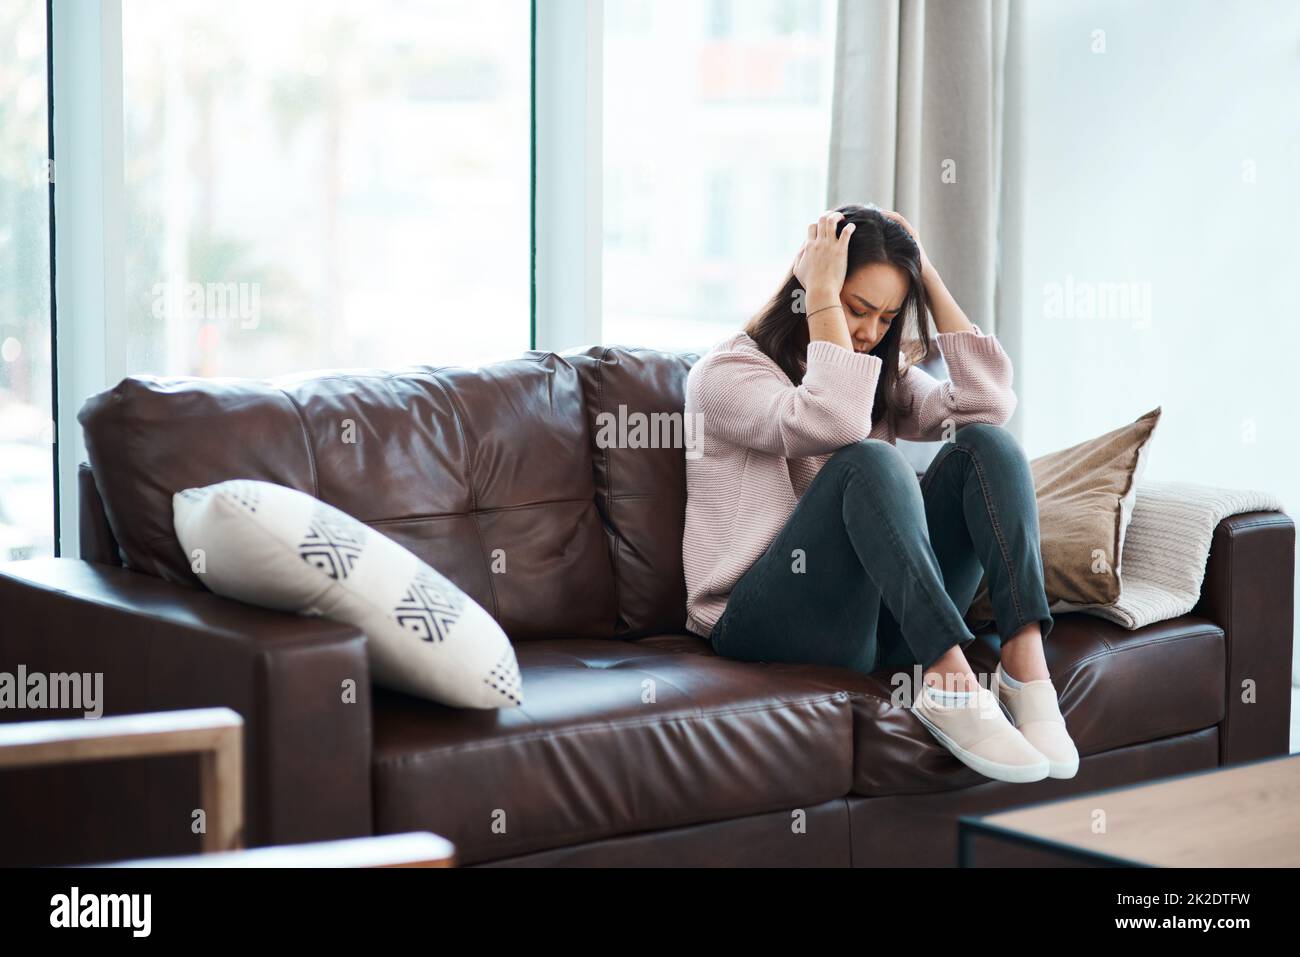 Its hard to fight the monster in your mind. Shot of a young woman experiencing mental anguish at home. Stock Photo